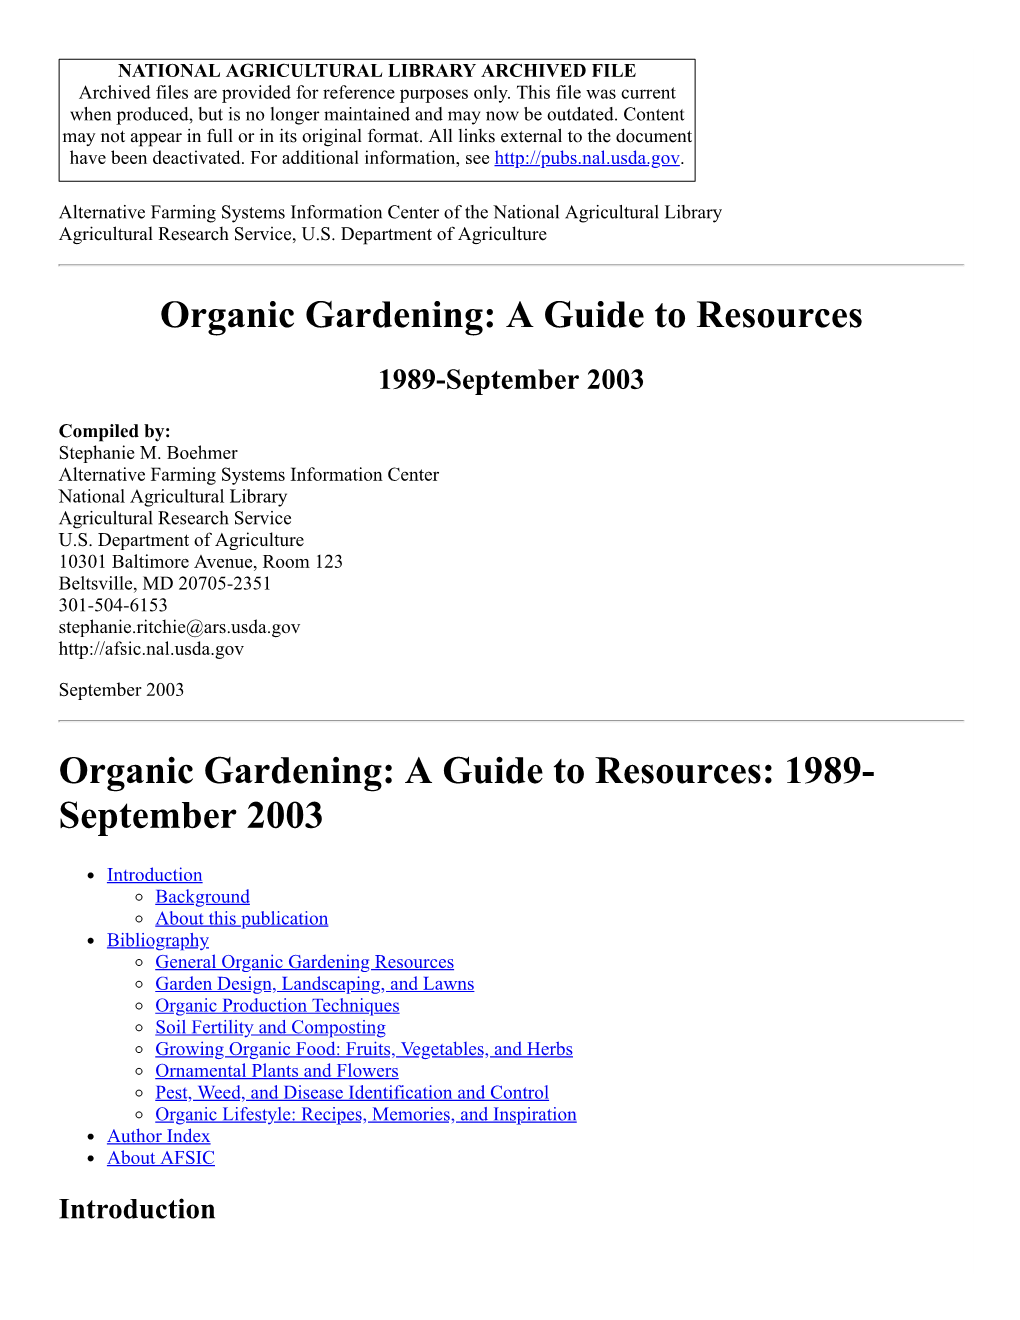 Organic Gardening: a Guide to Resources